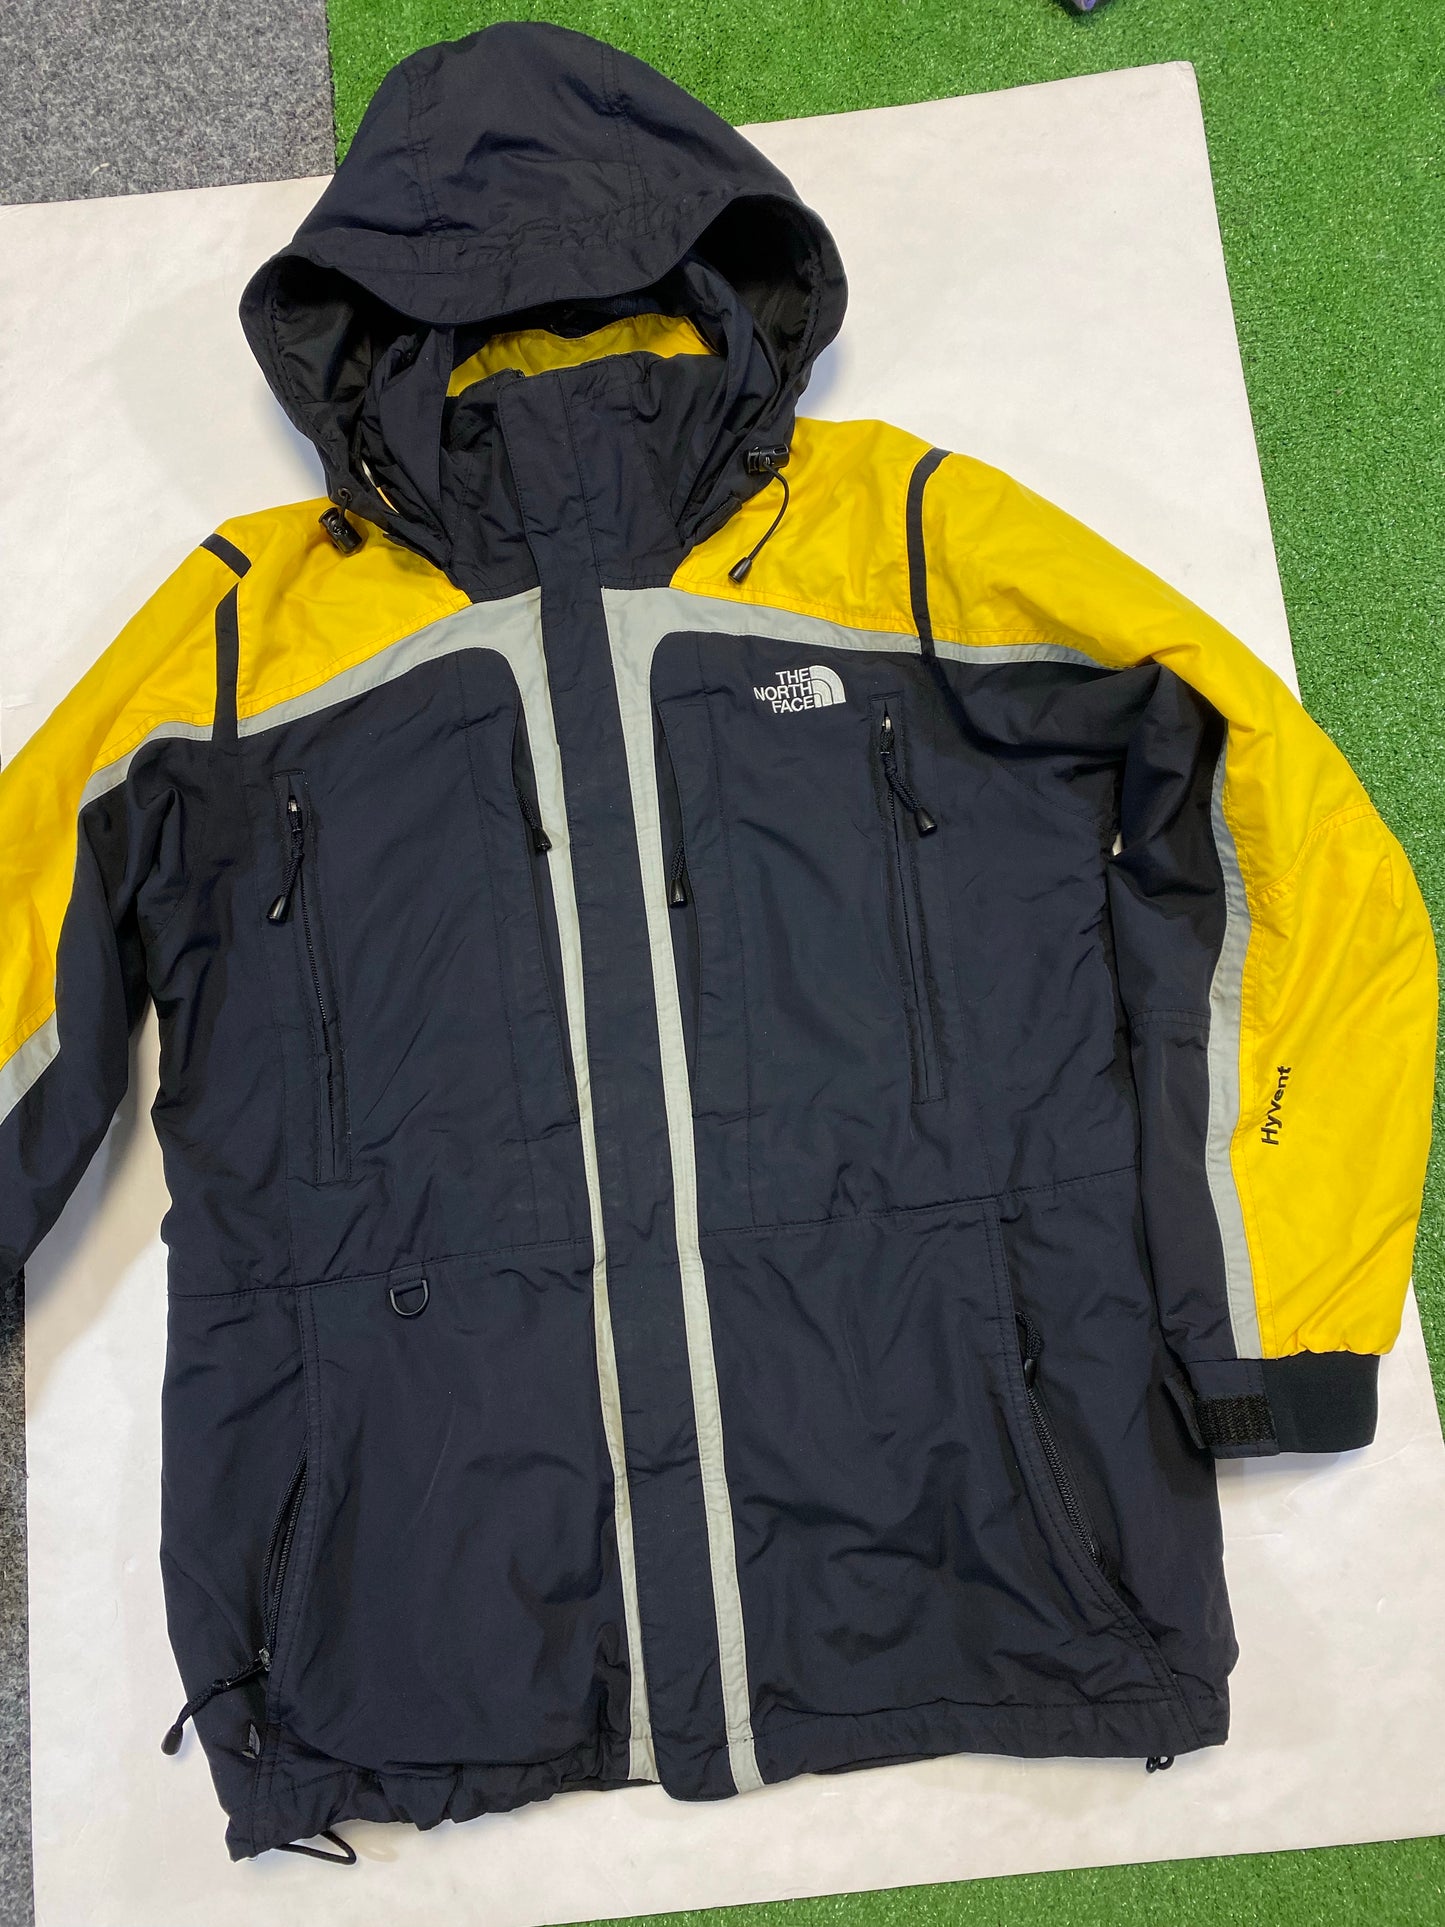 1990’s The North Face Hyvent Ski Jacket